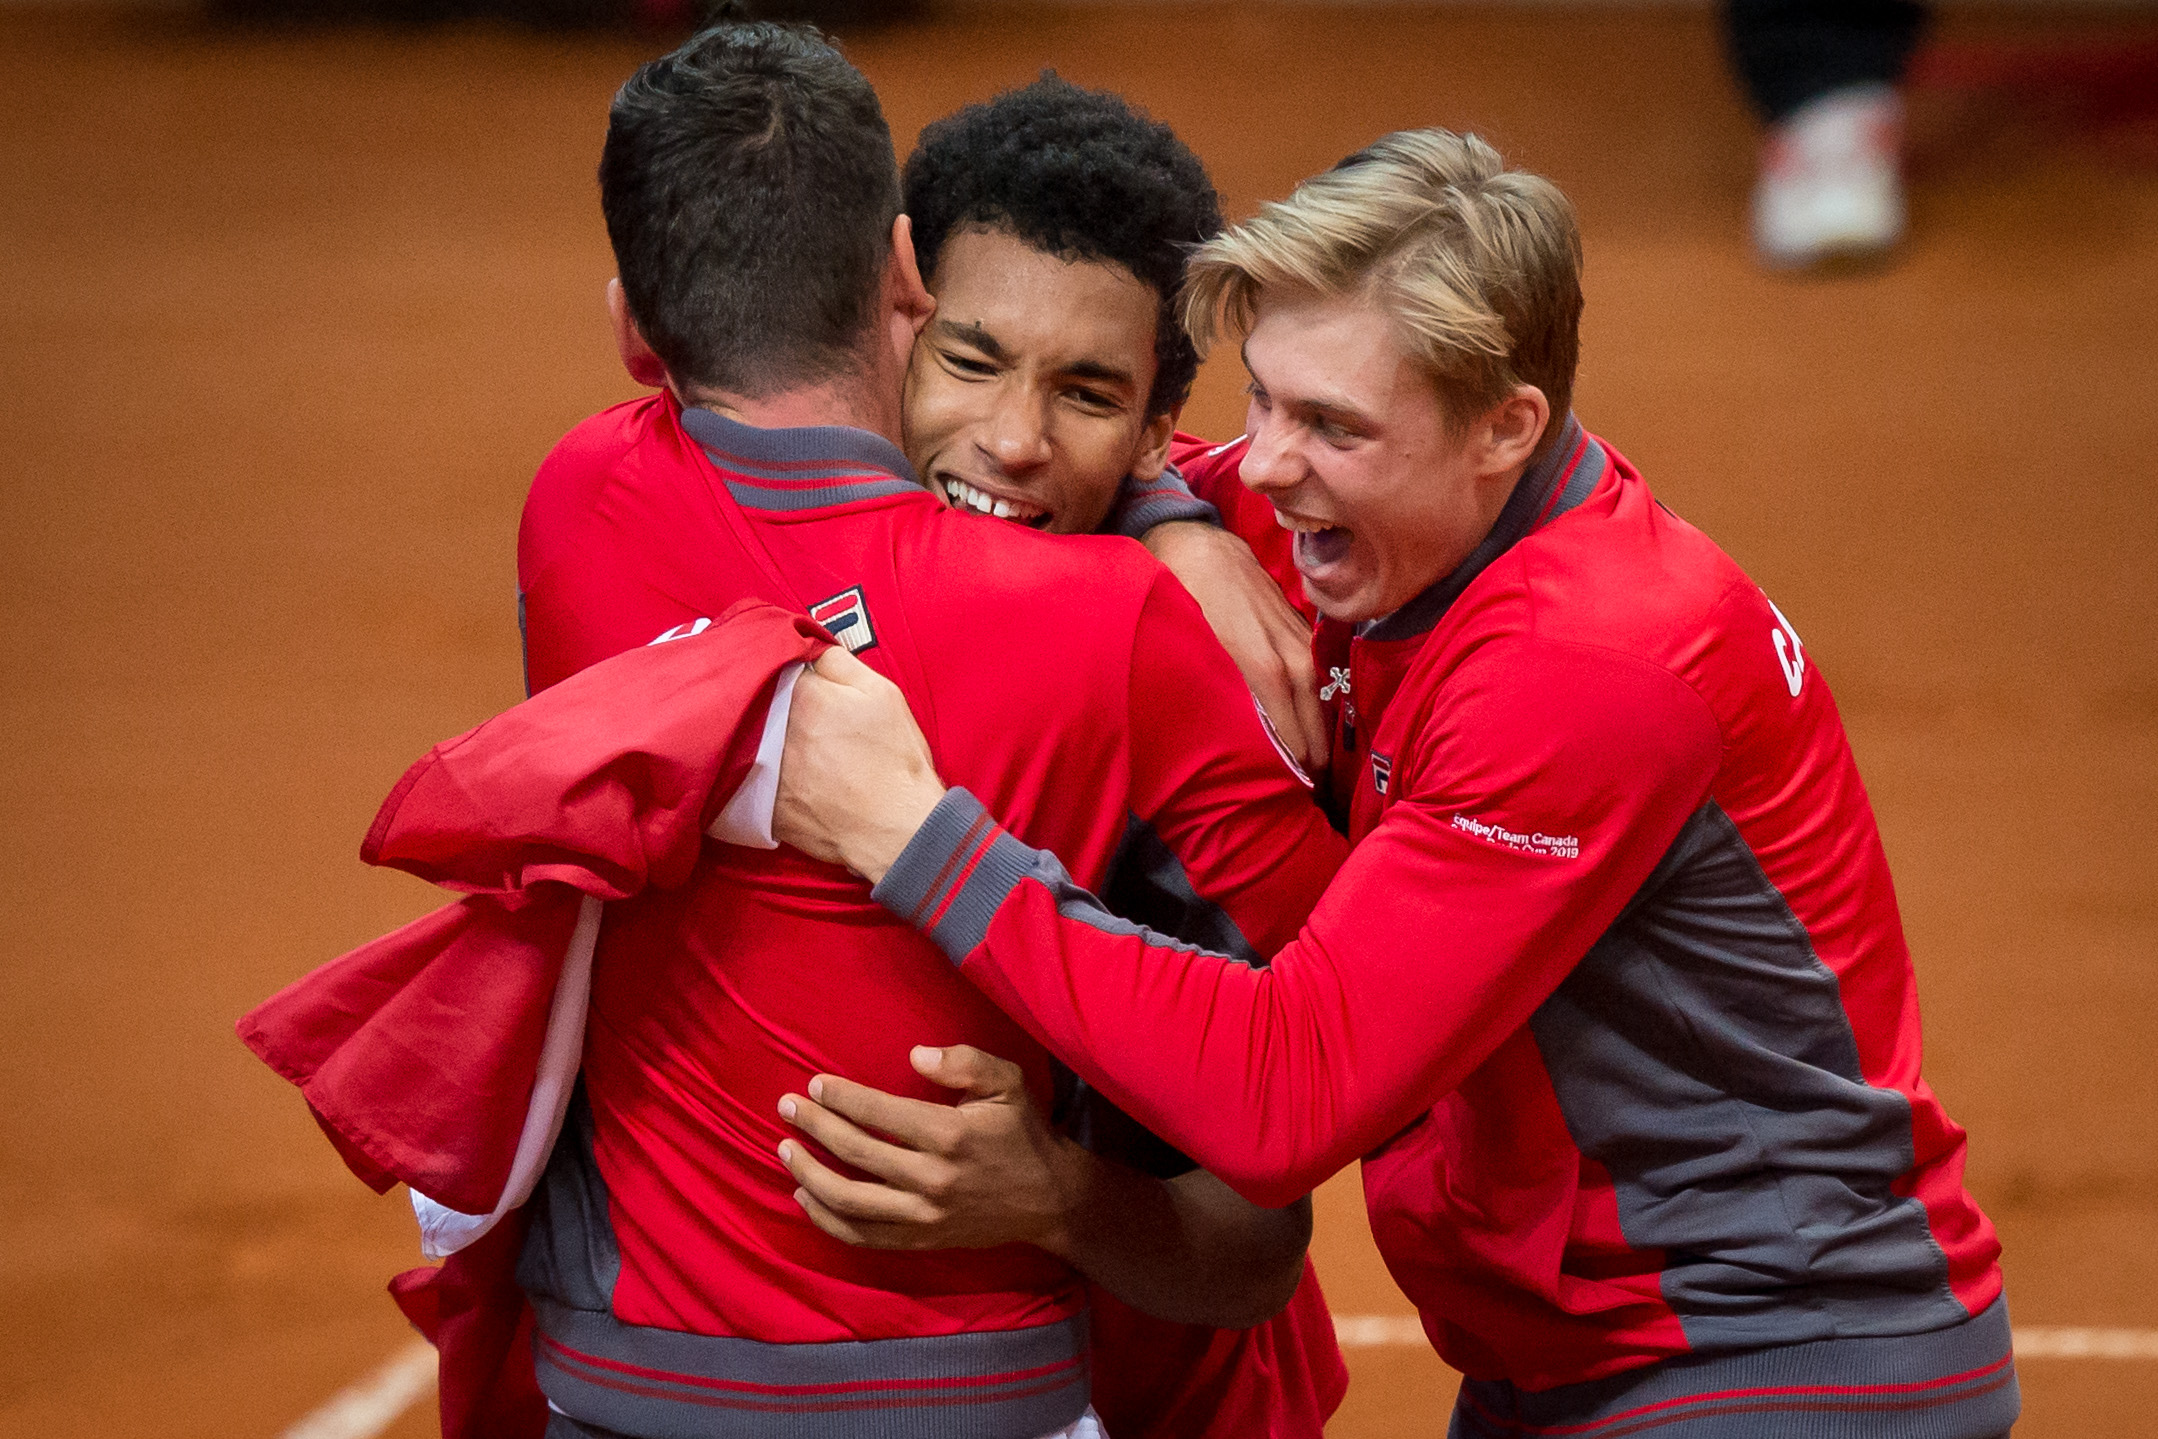 The Baseline Top 5 Davis Cup moments from the first round